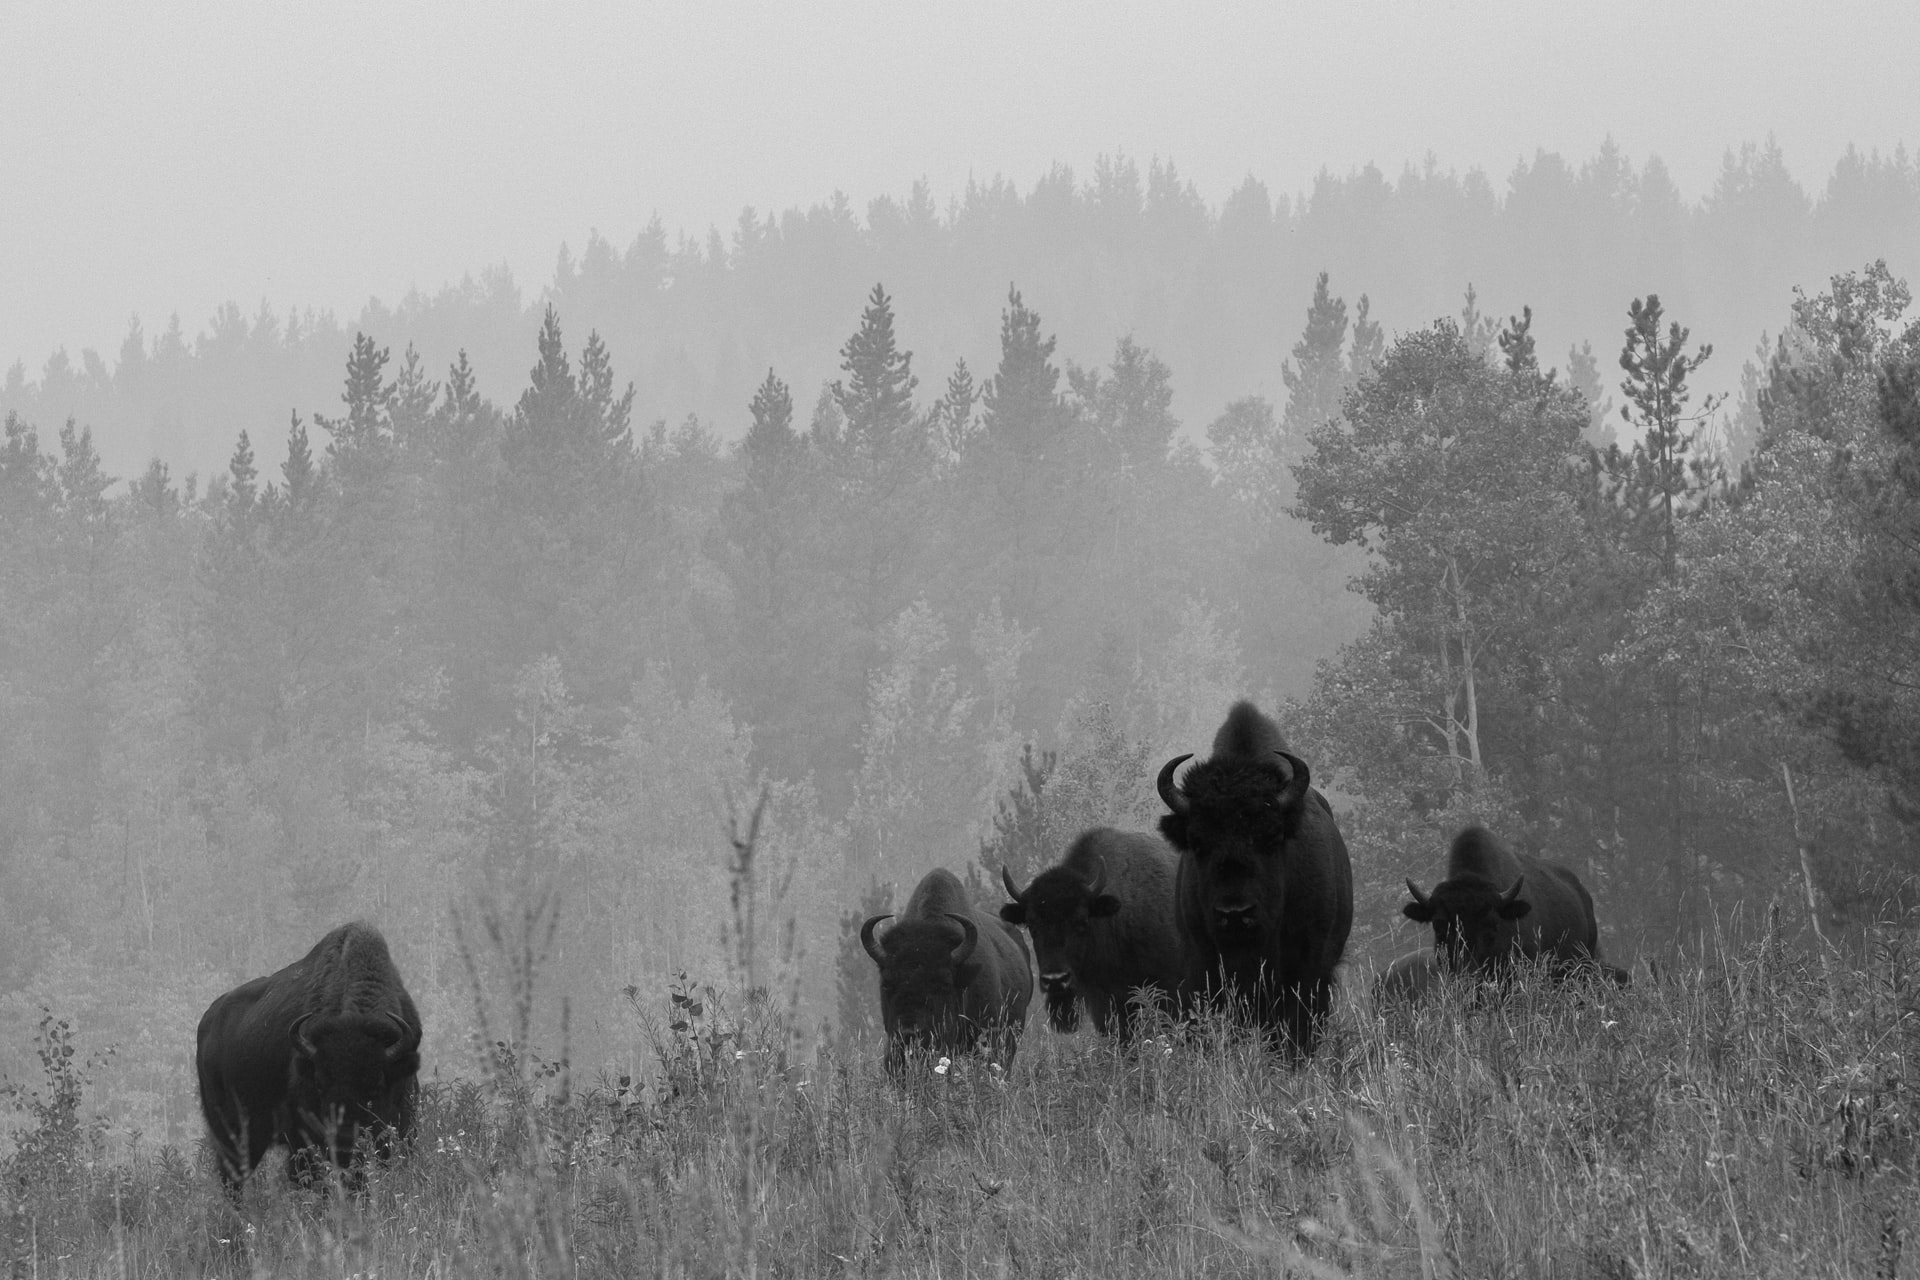 A group of five Bison in a field.